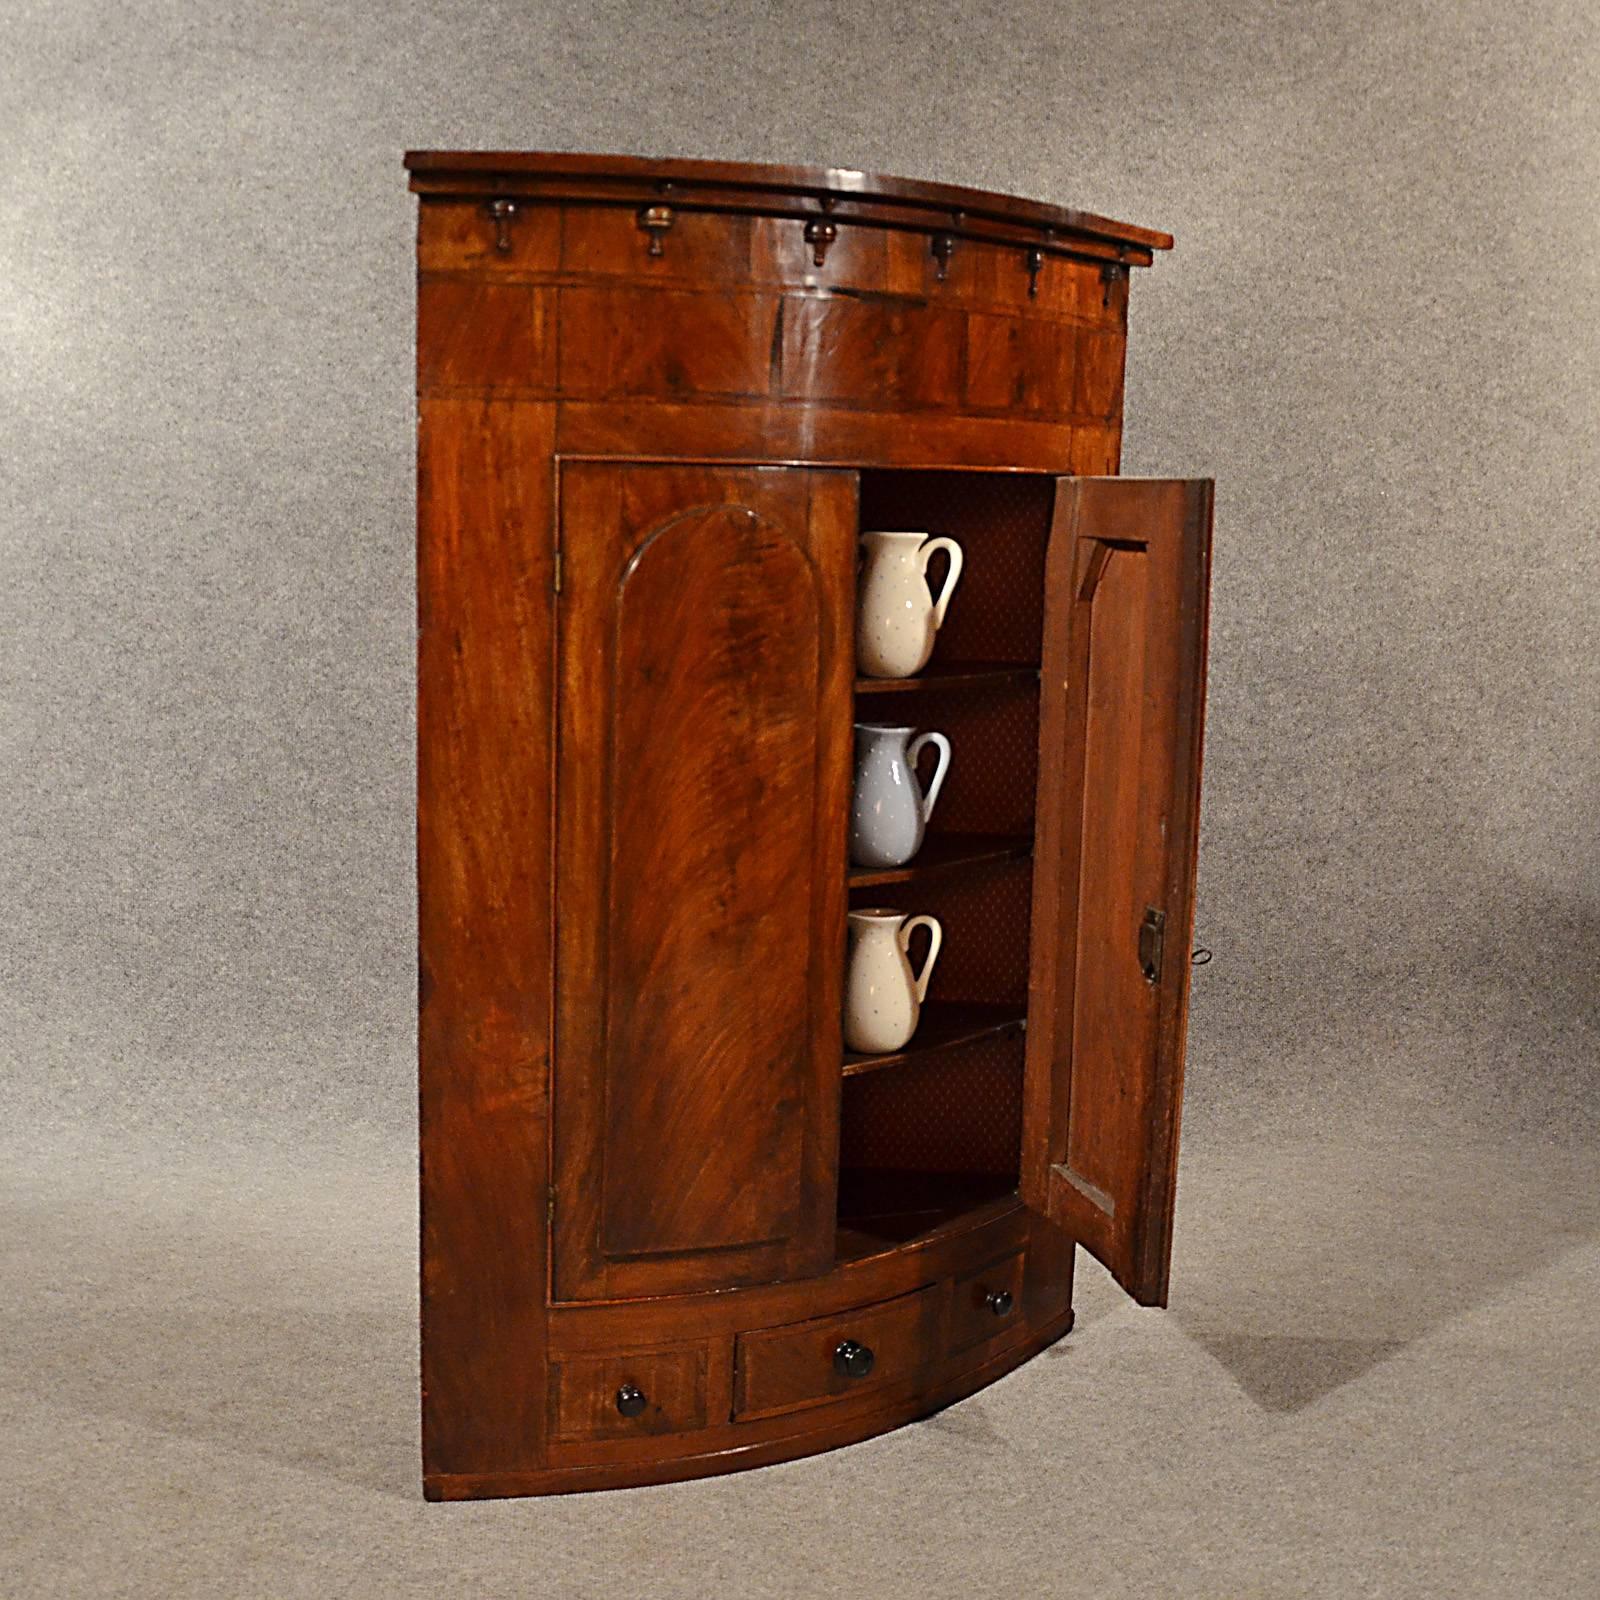 A pleasing English Victorian corner wall cabinet presented in very good antique condition
In stunning flame mahogany veneer
Rising from flush base
Desirable bow front
Central drawer flanked by faux fronts; all with cross-banded edge detail
Twin